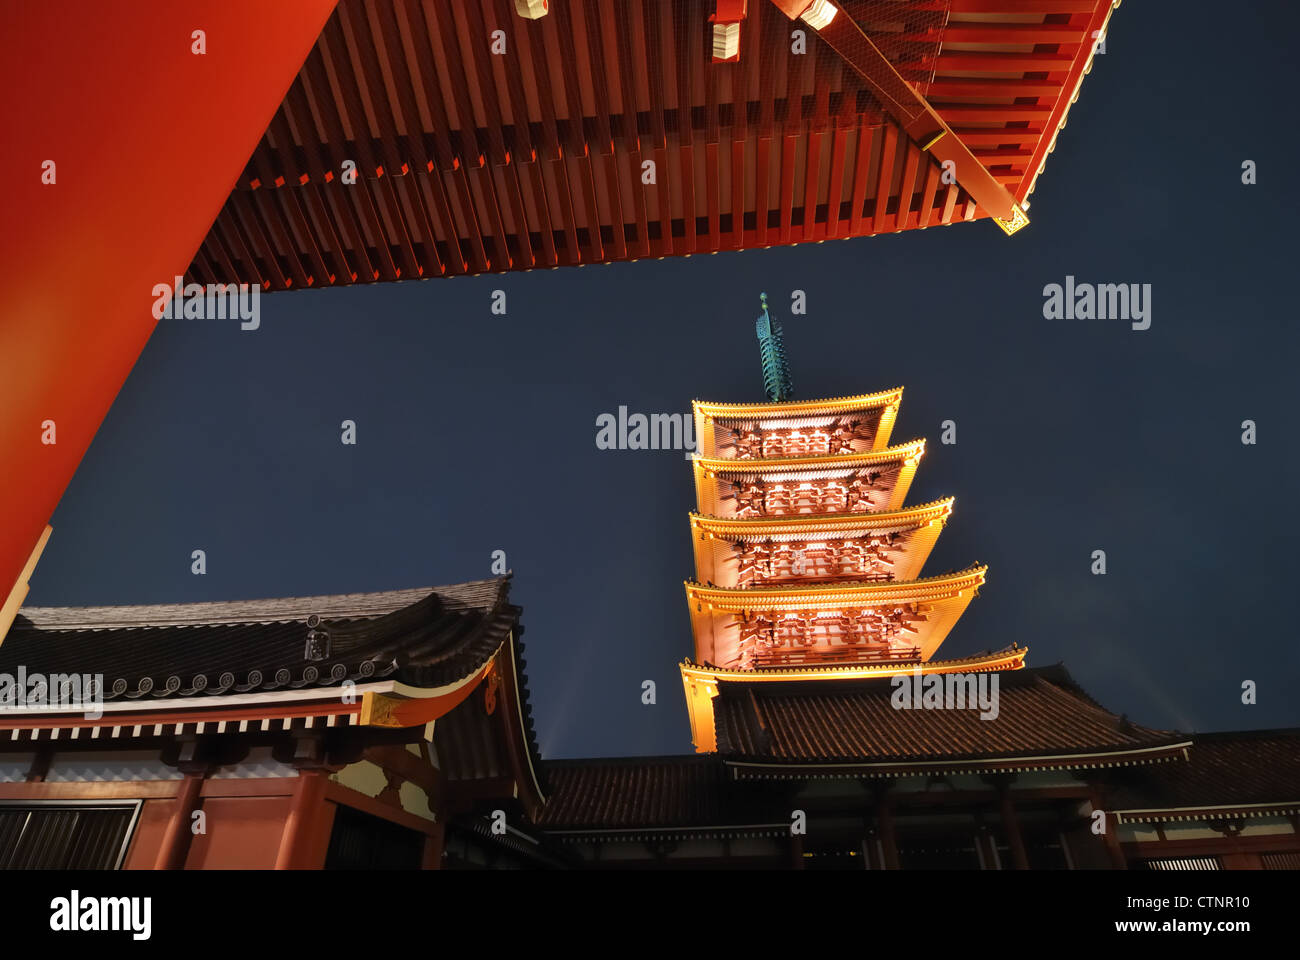 night image of famous Asakusa Temple in Tokyo Stock Photo